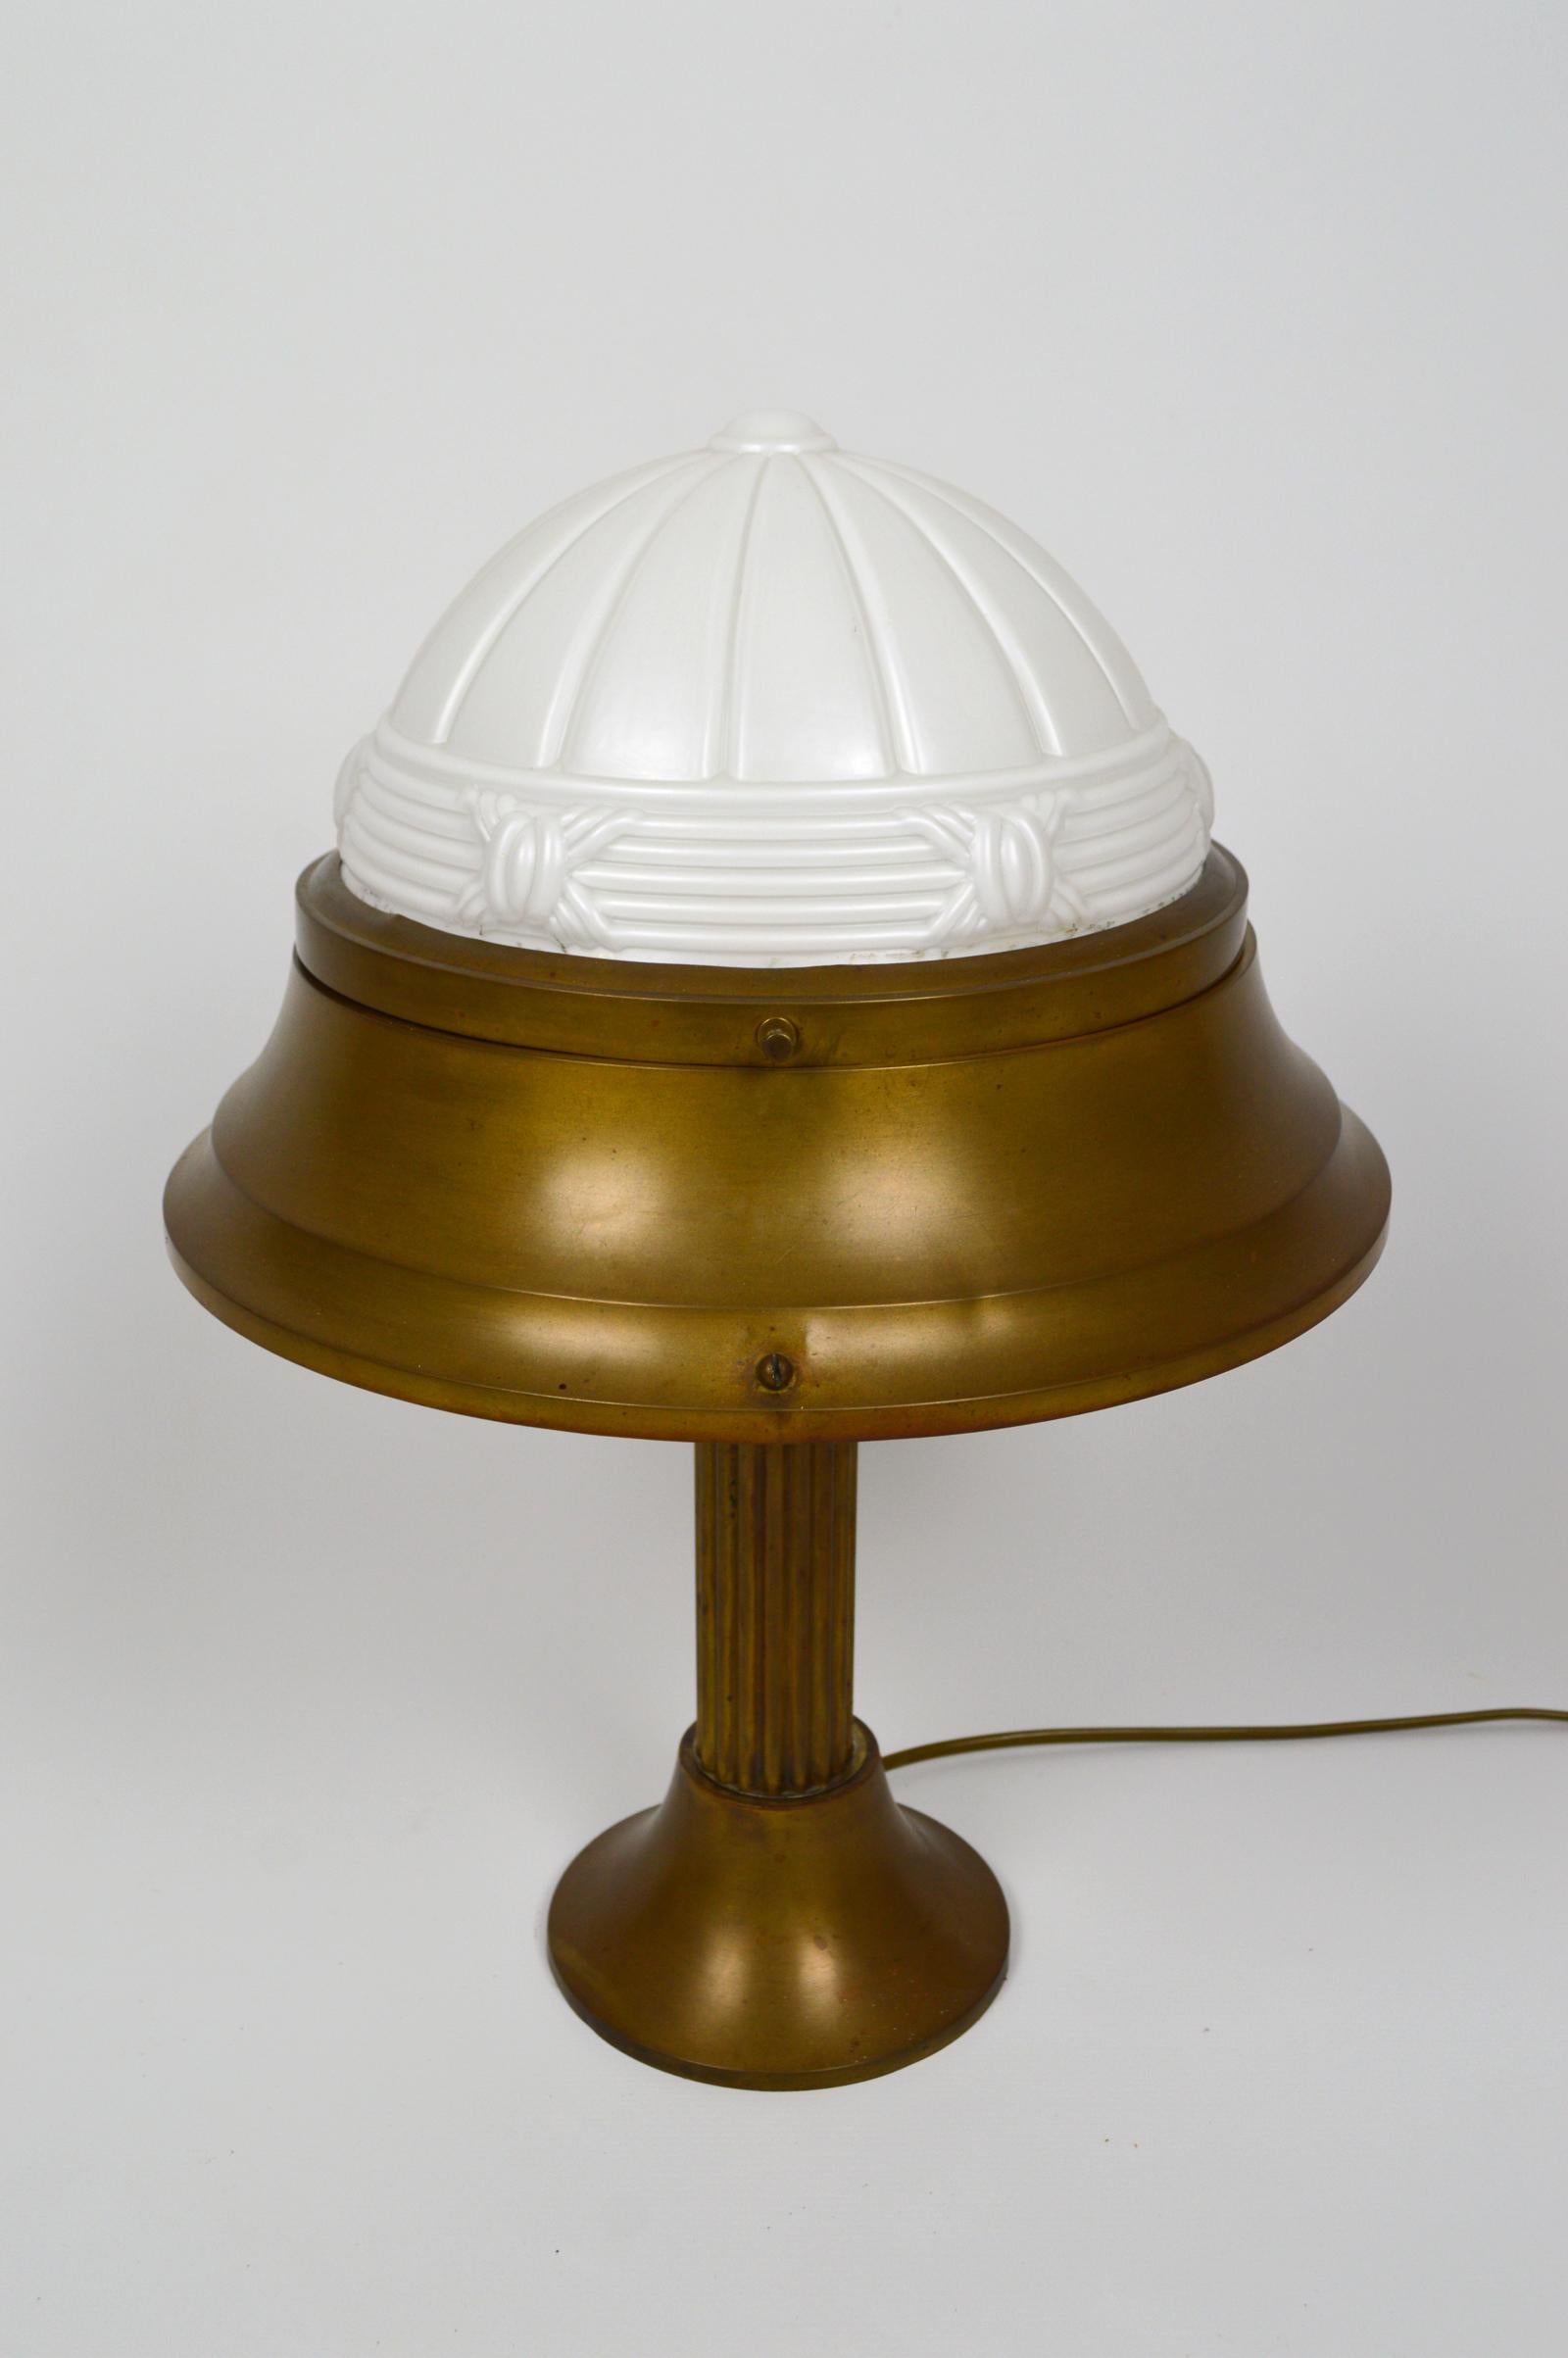 Mushroom-shaped desk lamp, made of a patinated brass base and a molded glass lampshade. Ideal for creating an Industrial or Steampunk atmosphere.

Art Deco style, France, circa 1930.

In good condition: beautiful patina, small crack barely visible